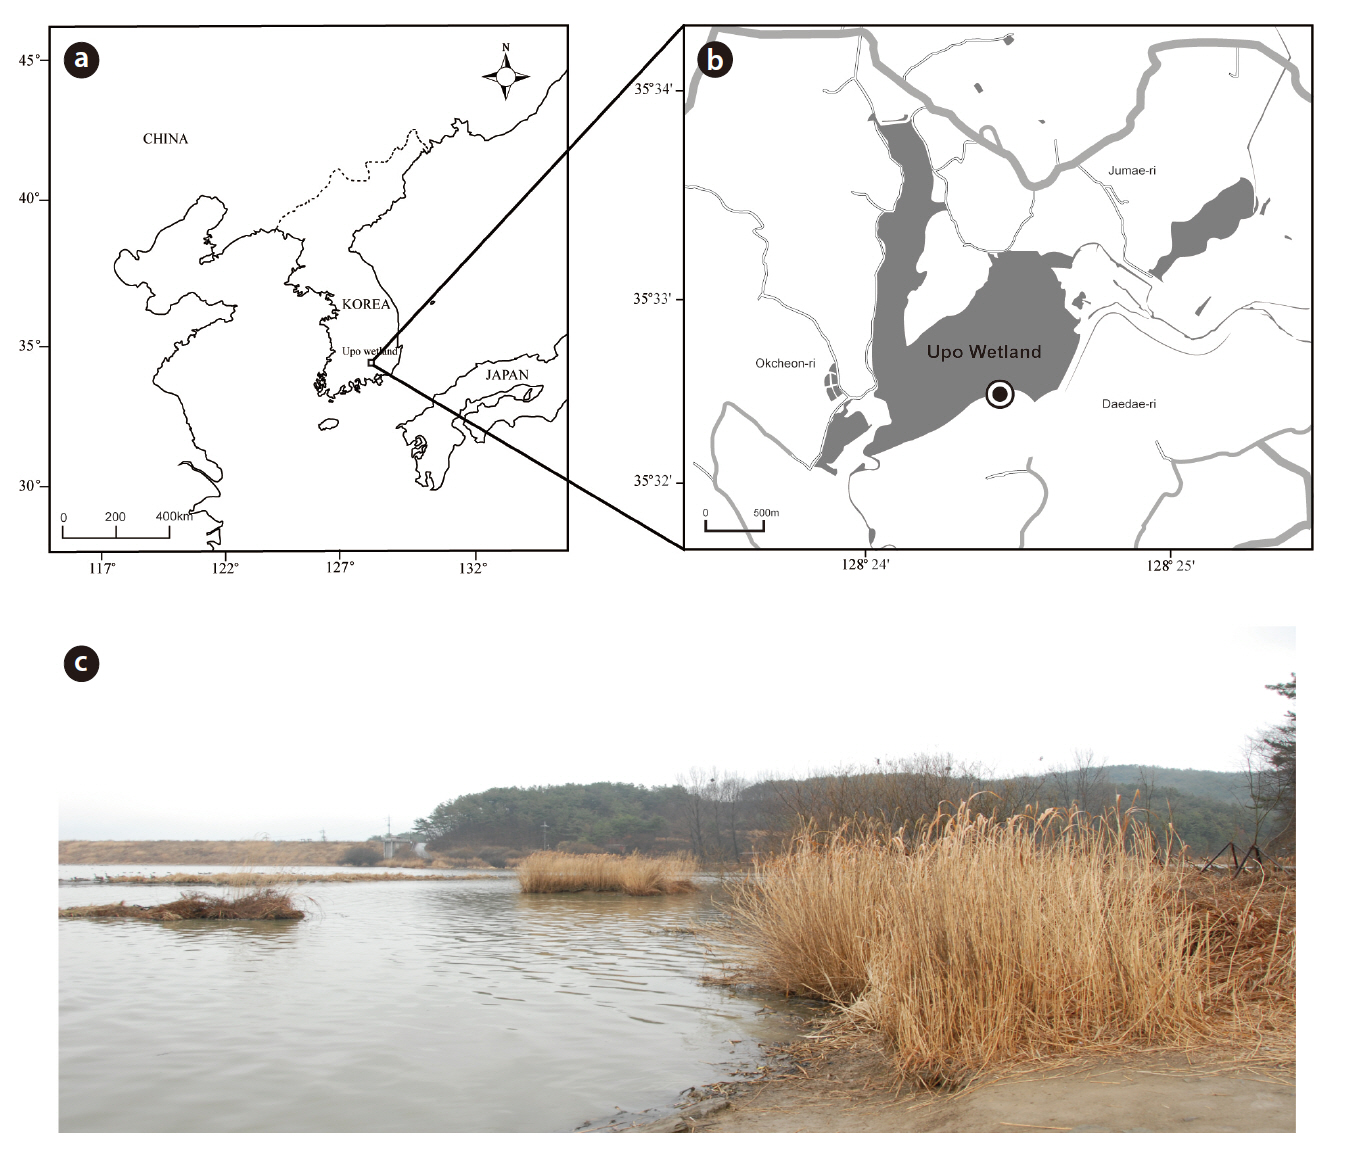 Study site in the Upo wetland. (a) Map of Korea with sampling site indicated. (b) Map of Upo swamp area. Circled dot: site where soil samples were collected. (c) Overview of the study site.